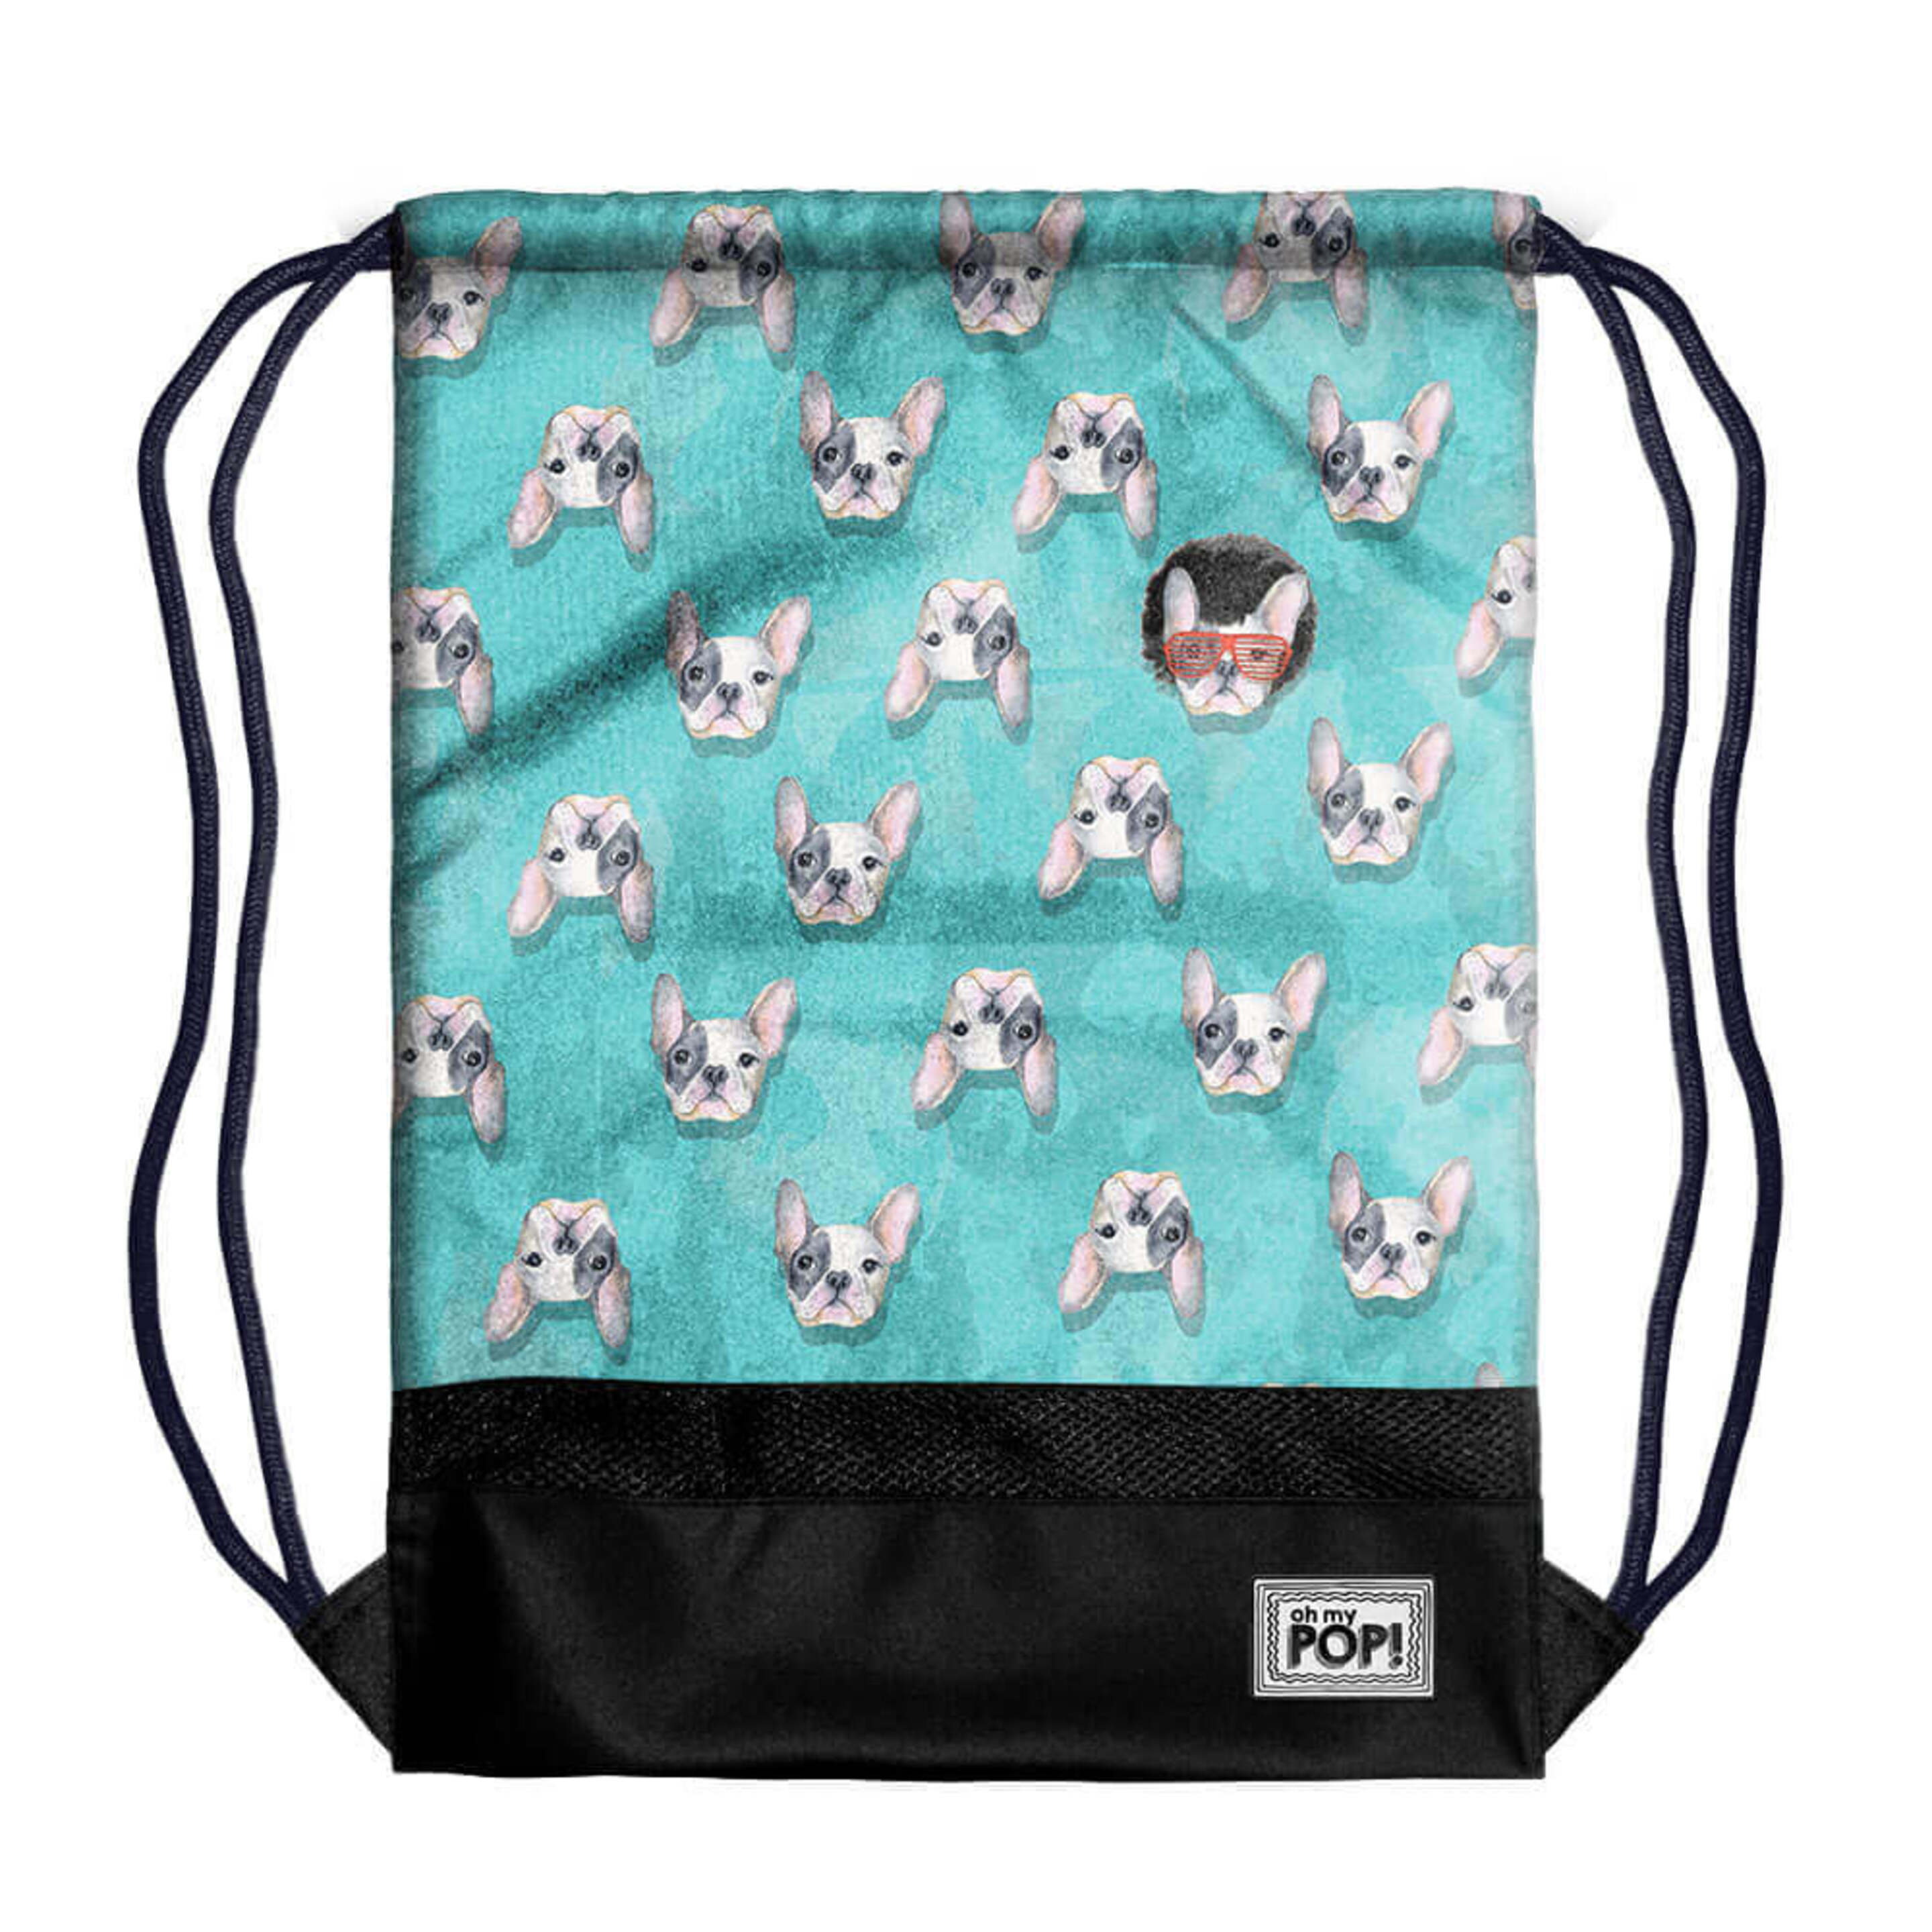 Gymsack Oh My Pop! Doggy - multicolor - 